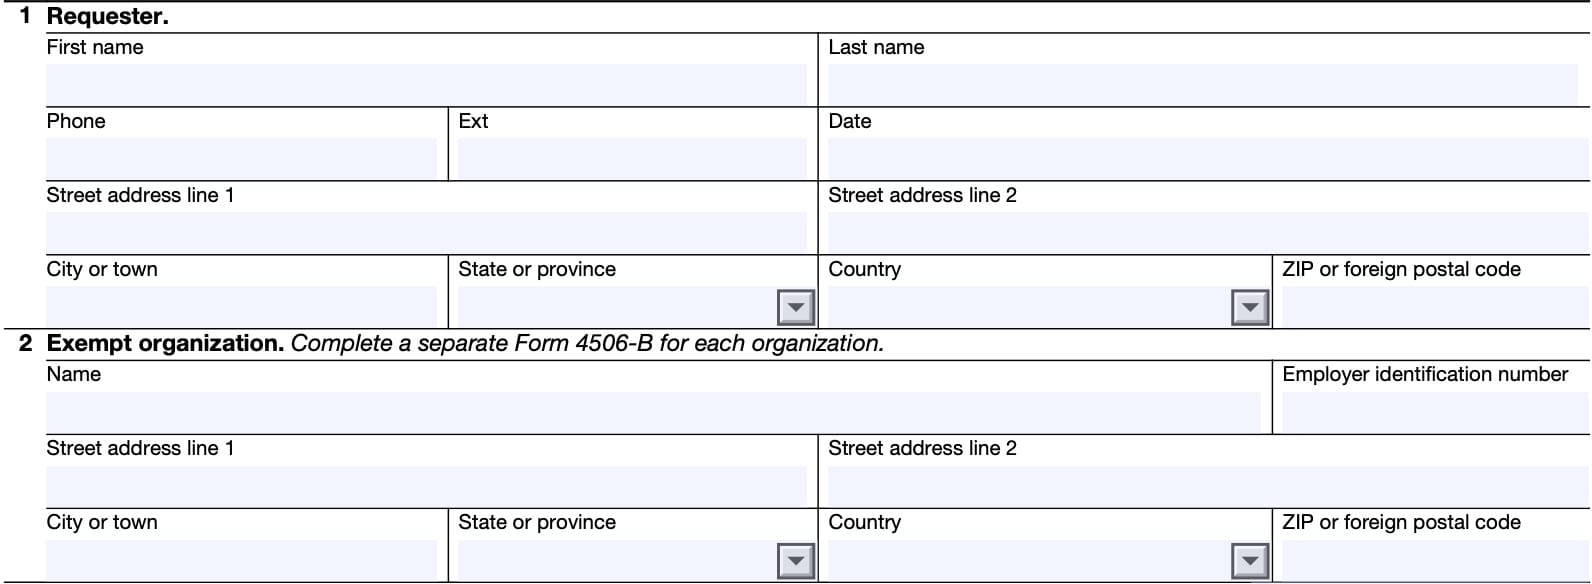 irs form 4506-b, requester and exempt organization information